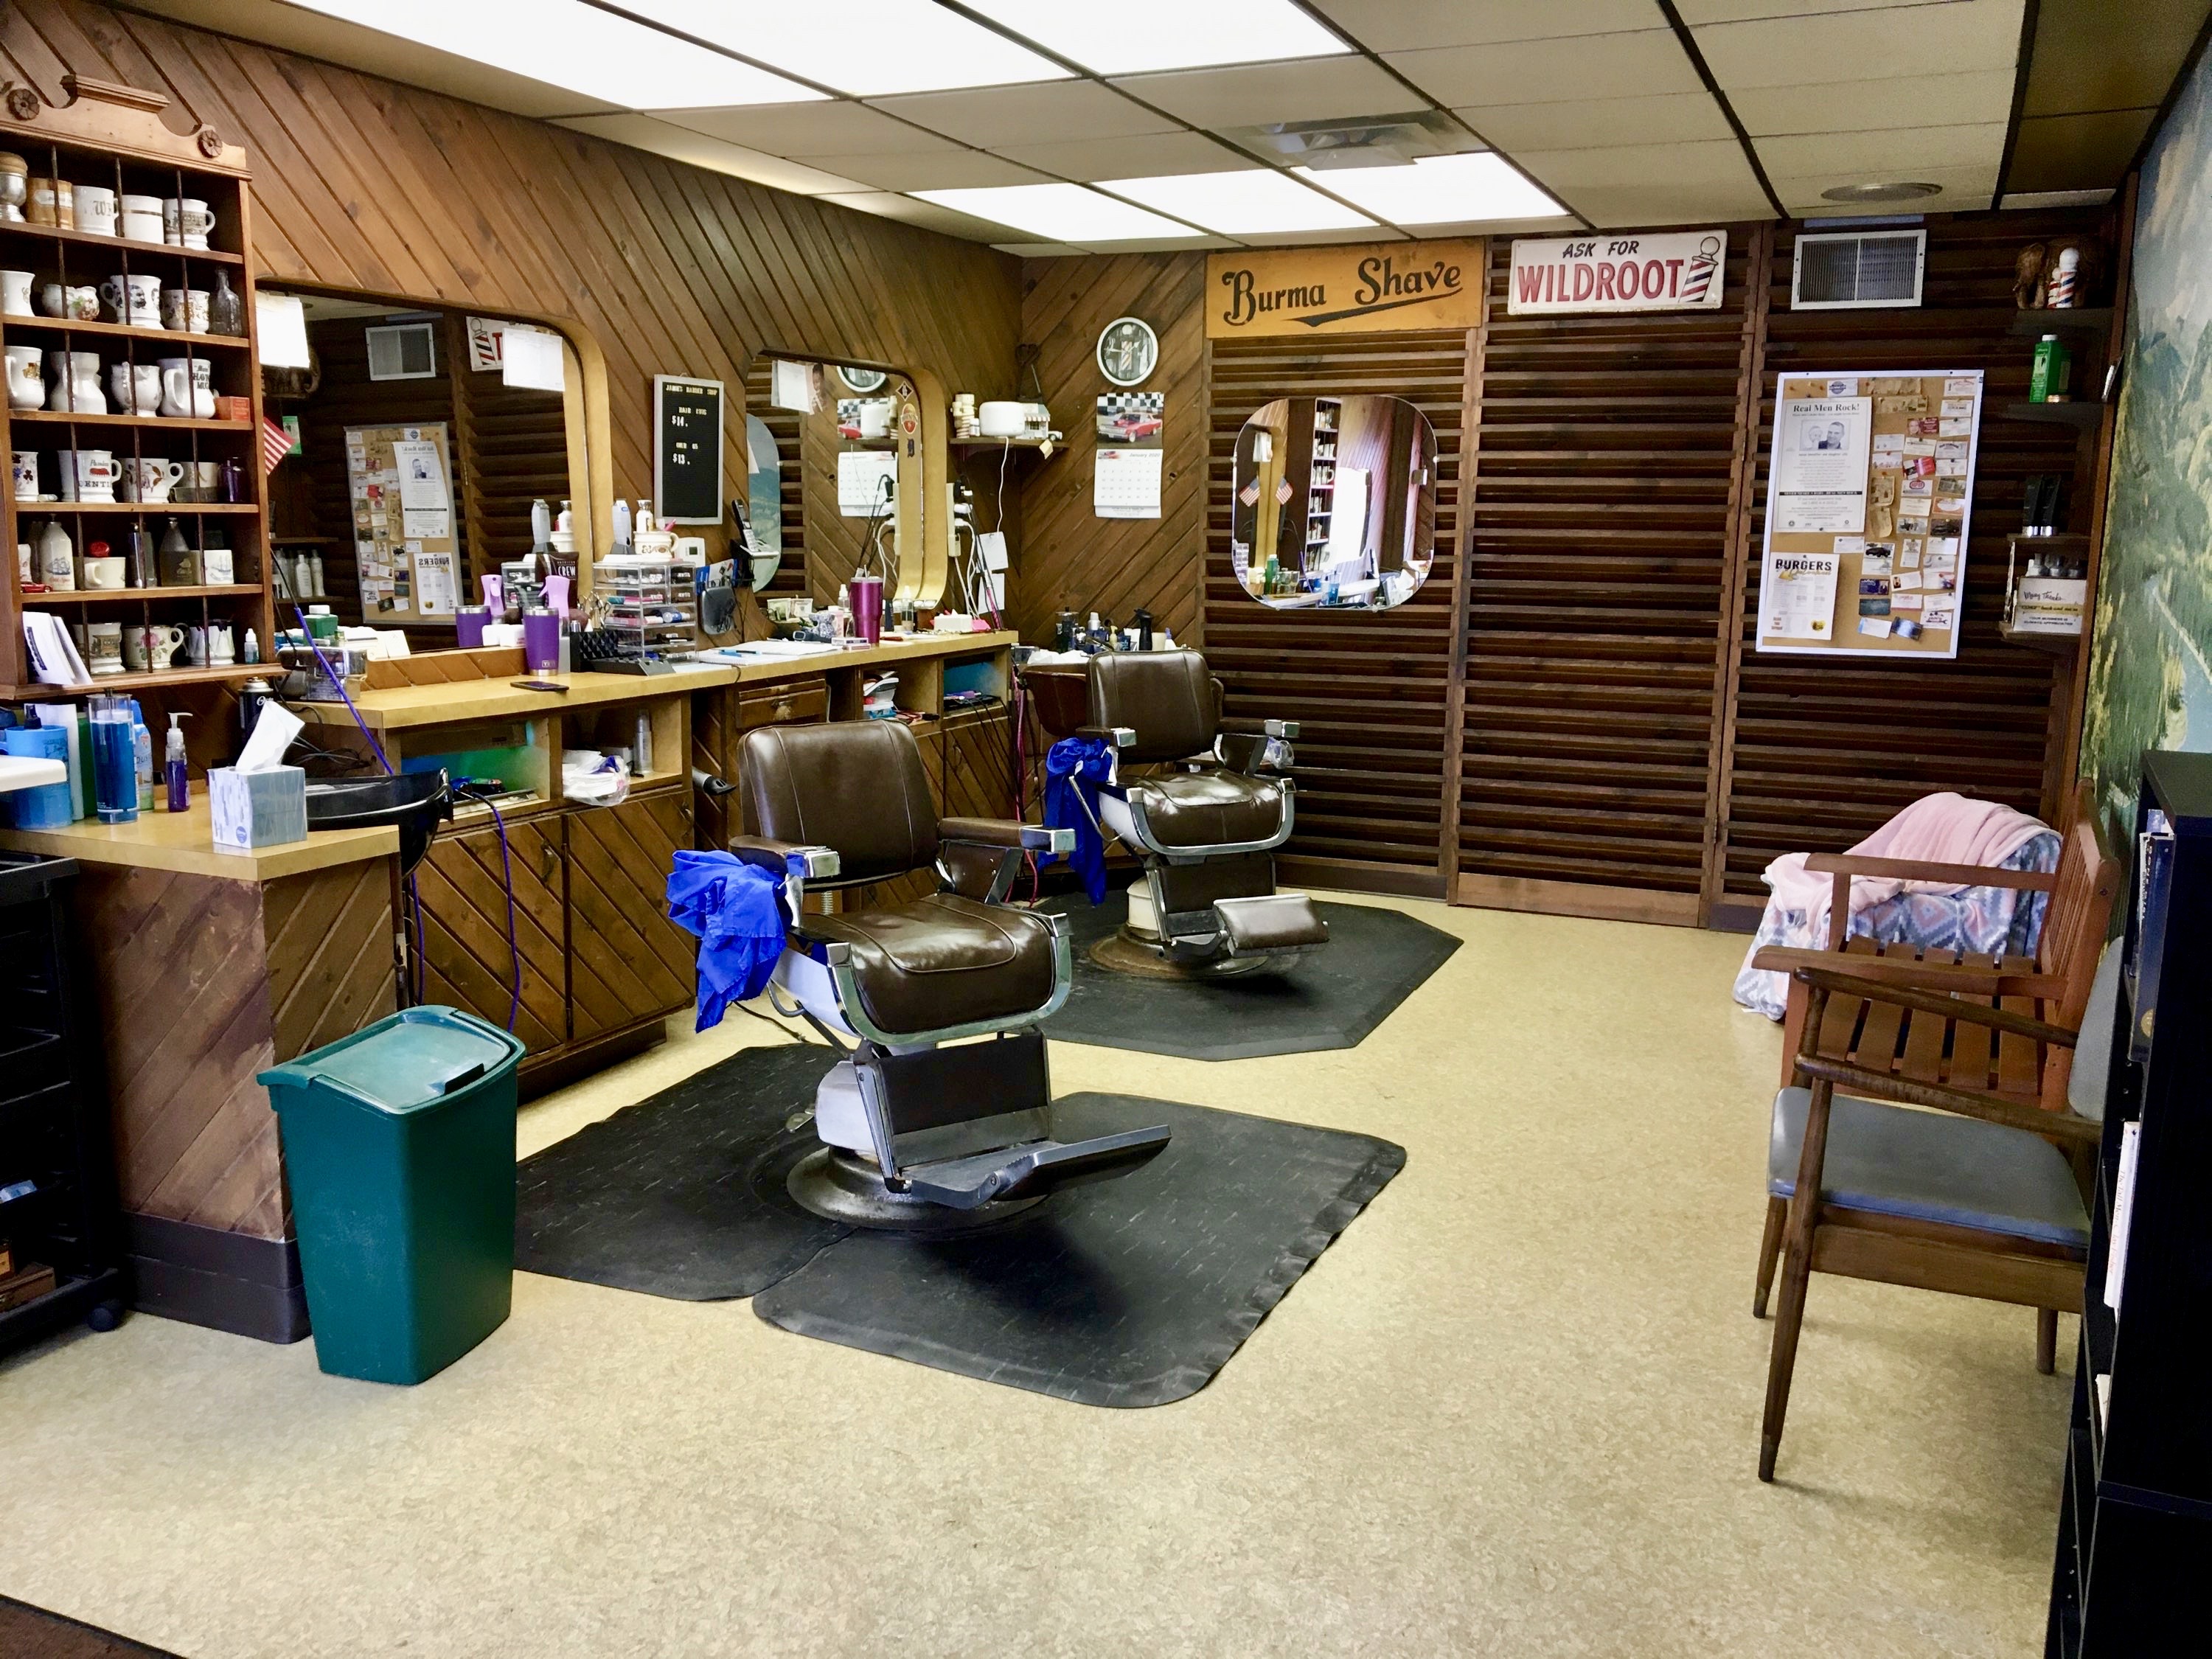 Maintaining tradition at Jamie’s Barbershop